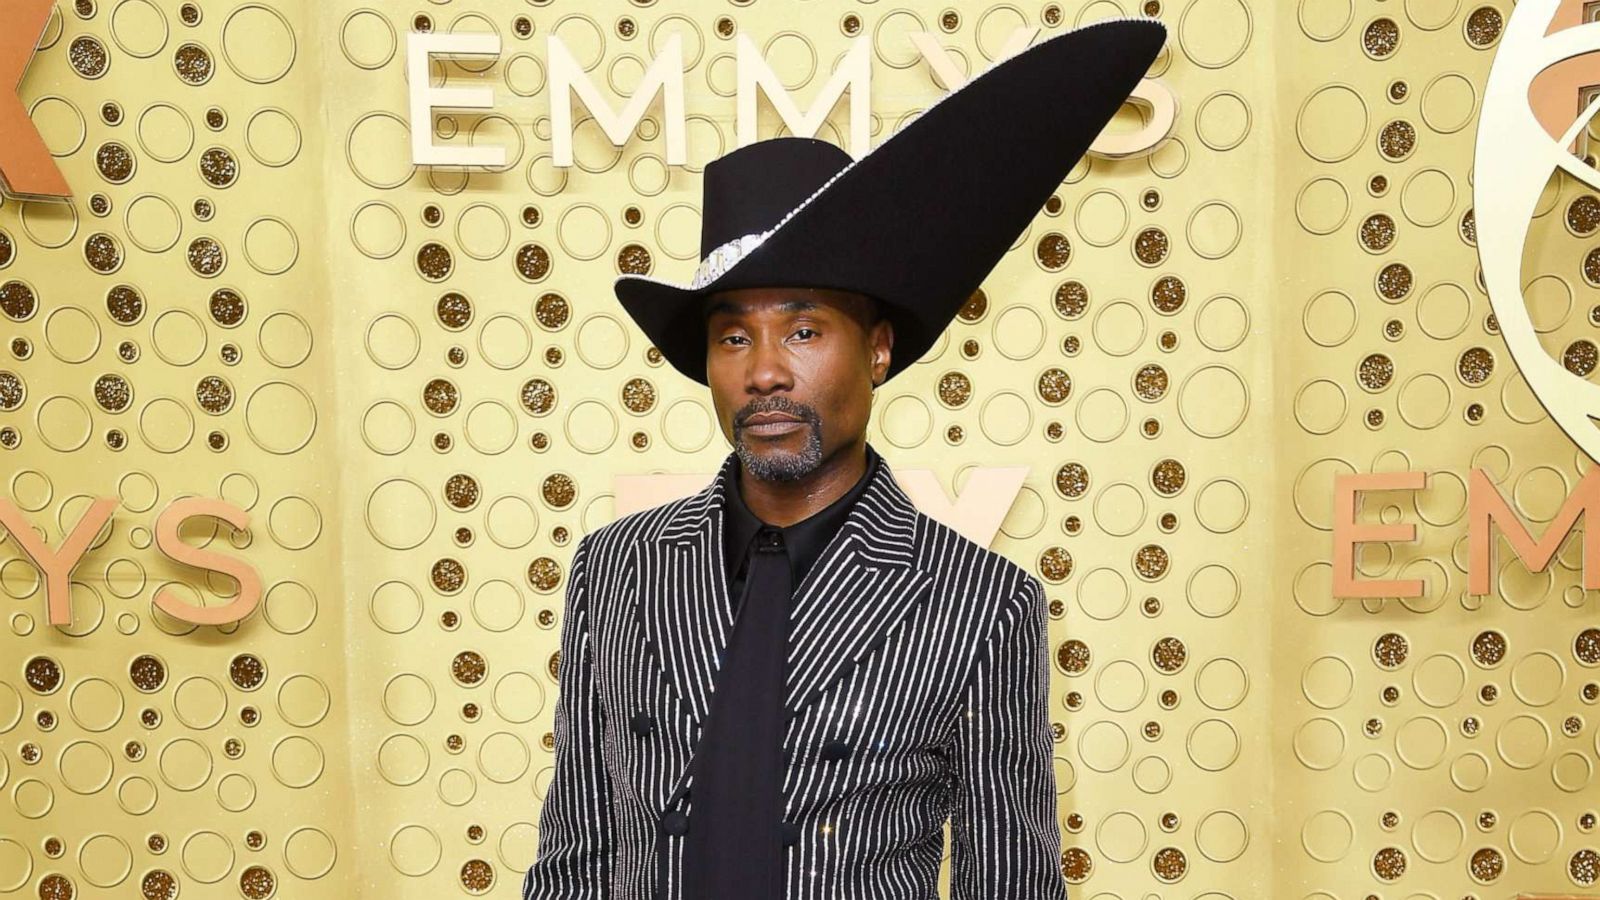 Billy Porter Wears Michael Kors to the Emmys 2019